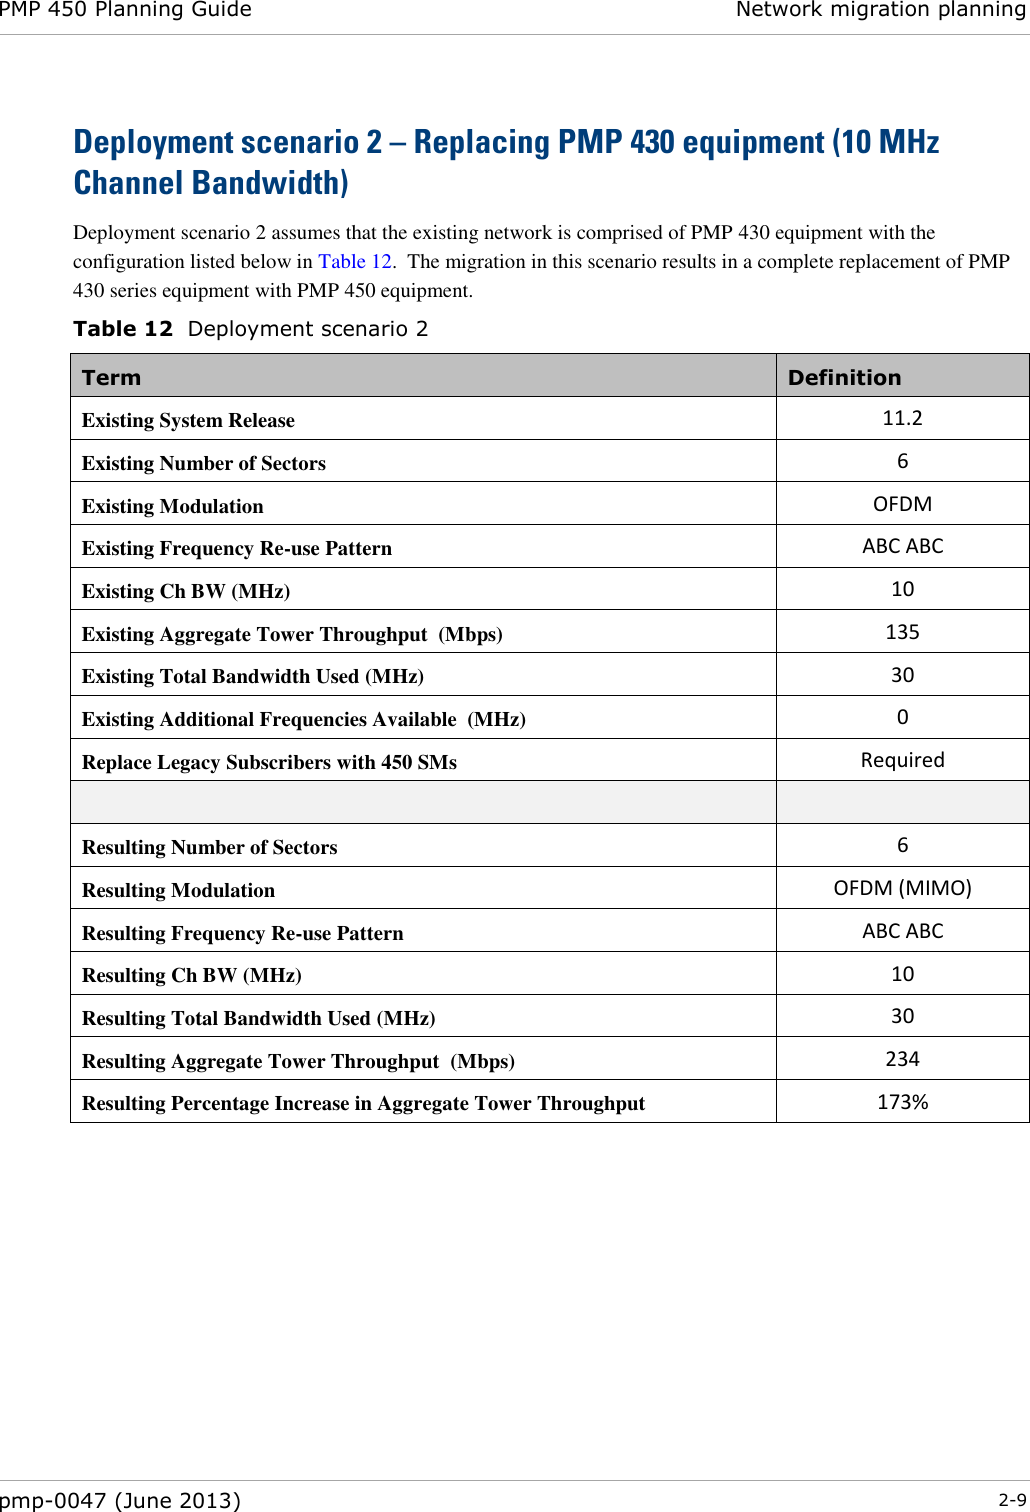 PMP 450 Planning Guide Network migration planning  pmp-0047 (June 2013)  2-9  Deployment scenario 2 – Replacing PMP 430 equipment (10 MHz Channel Bandwidth) Deployment scenario 2 assumes that the existing network is comprised of PMP 430 equipment with the configuration listed below in Table 12.  The migration in this scenario results in a complete replacement of PMP 430 series equipment with PMP 450 equipment. Table 12  Deployment scenario 2 Term Definition Existing System Release 11.2 Existing Number of Sectors 6 Existing Modulation OFDM Existing Frequency Re-use Pattern ABC ABC Existing Ch BW (MHz) 10 Existing Aggregate Tower Throughput  (Mbps) 135 Existing Total Bandwidth Used (MHz) 30 Existing Additional Frequencies Available  (MHz) 0 Replace Legacy Subscribers with 450 SMs Required   Resulting Number of Sectors 6 Resulting Modulation OFDM (MIMO) Resulting Frequency Re-use Pattern ABC ABC Resulting Ch BW (MHz) 10 Resulting Total Bandwidth Used (MHz) 30 Resulting Aggregate Tower Throughput  (Mbps) 234 Resulting Percentage Increase in Aggregate Tower Throughput 173%  